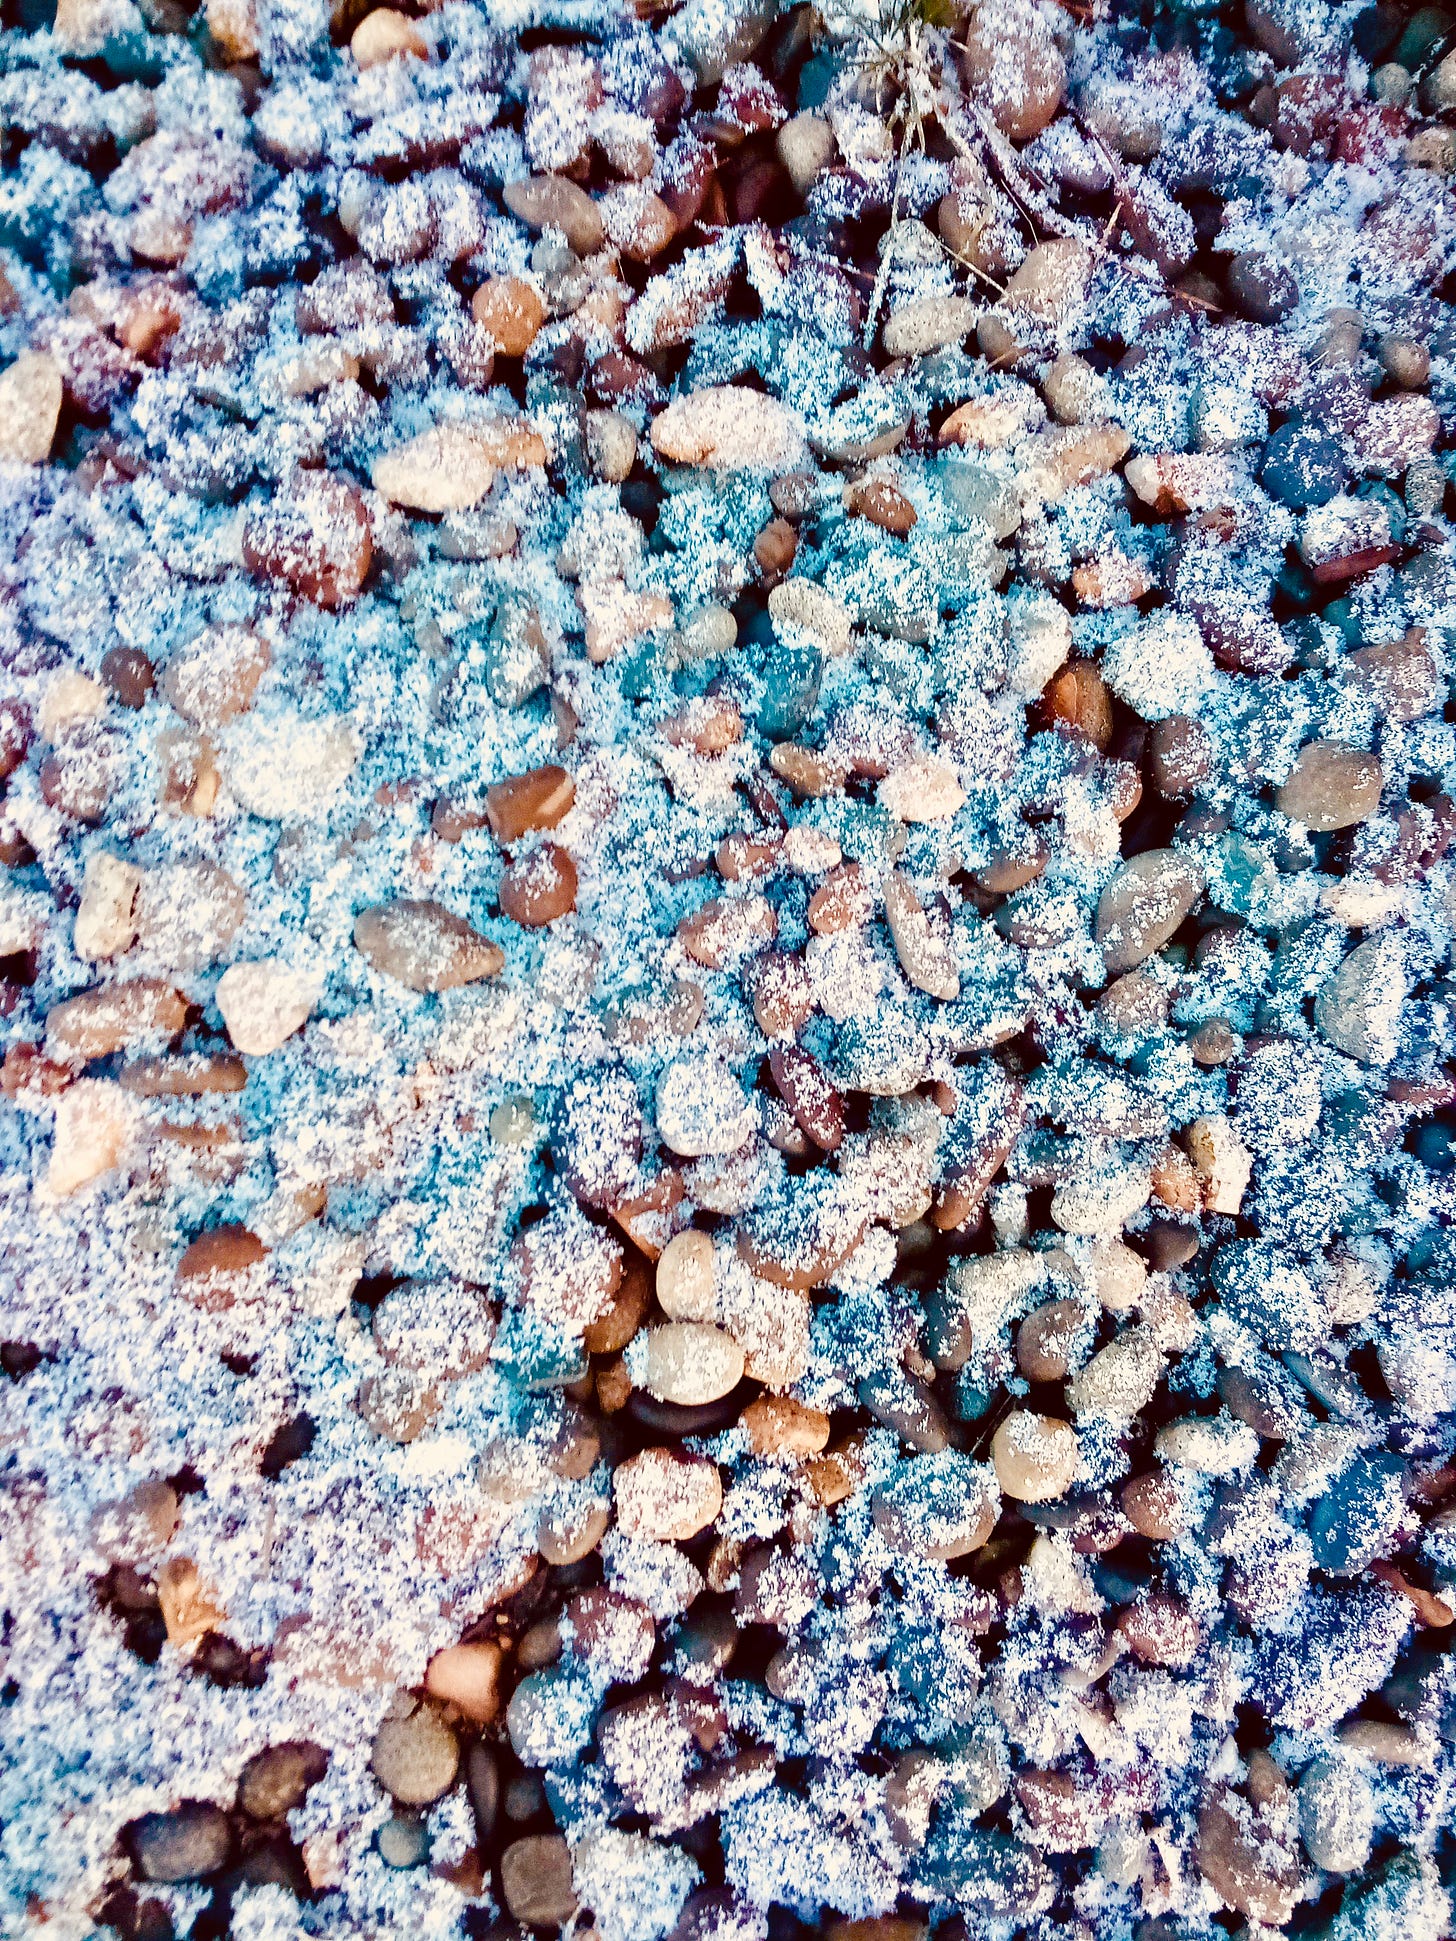 Photo of colorful pebbles under a dusting of snow.